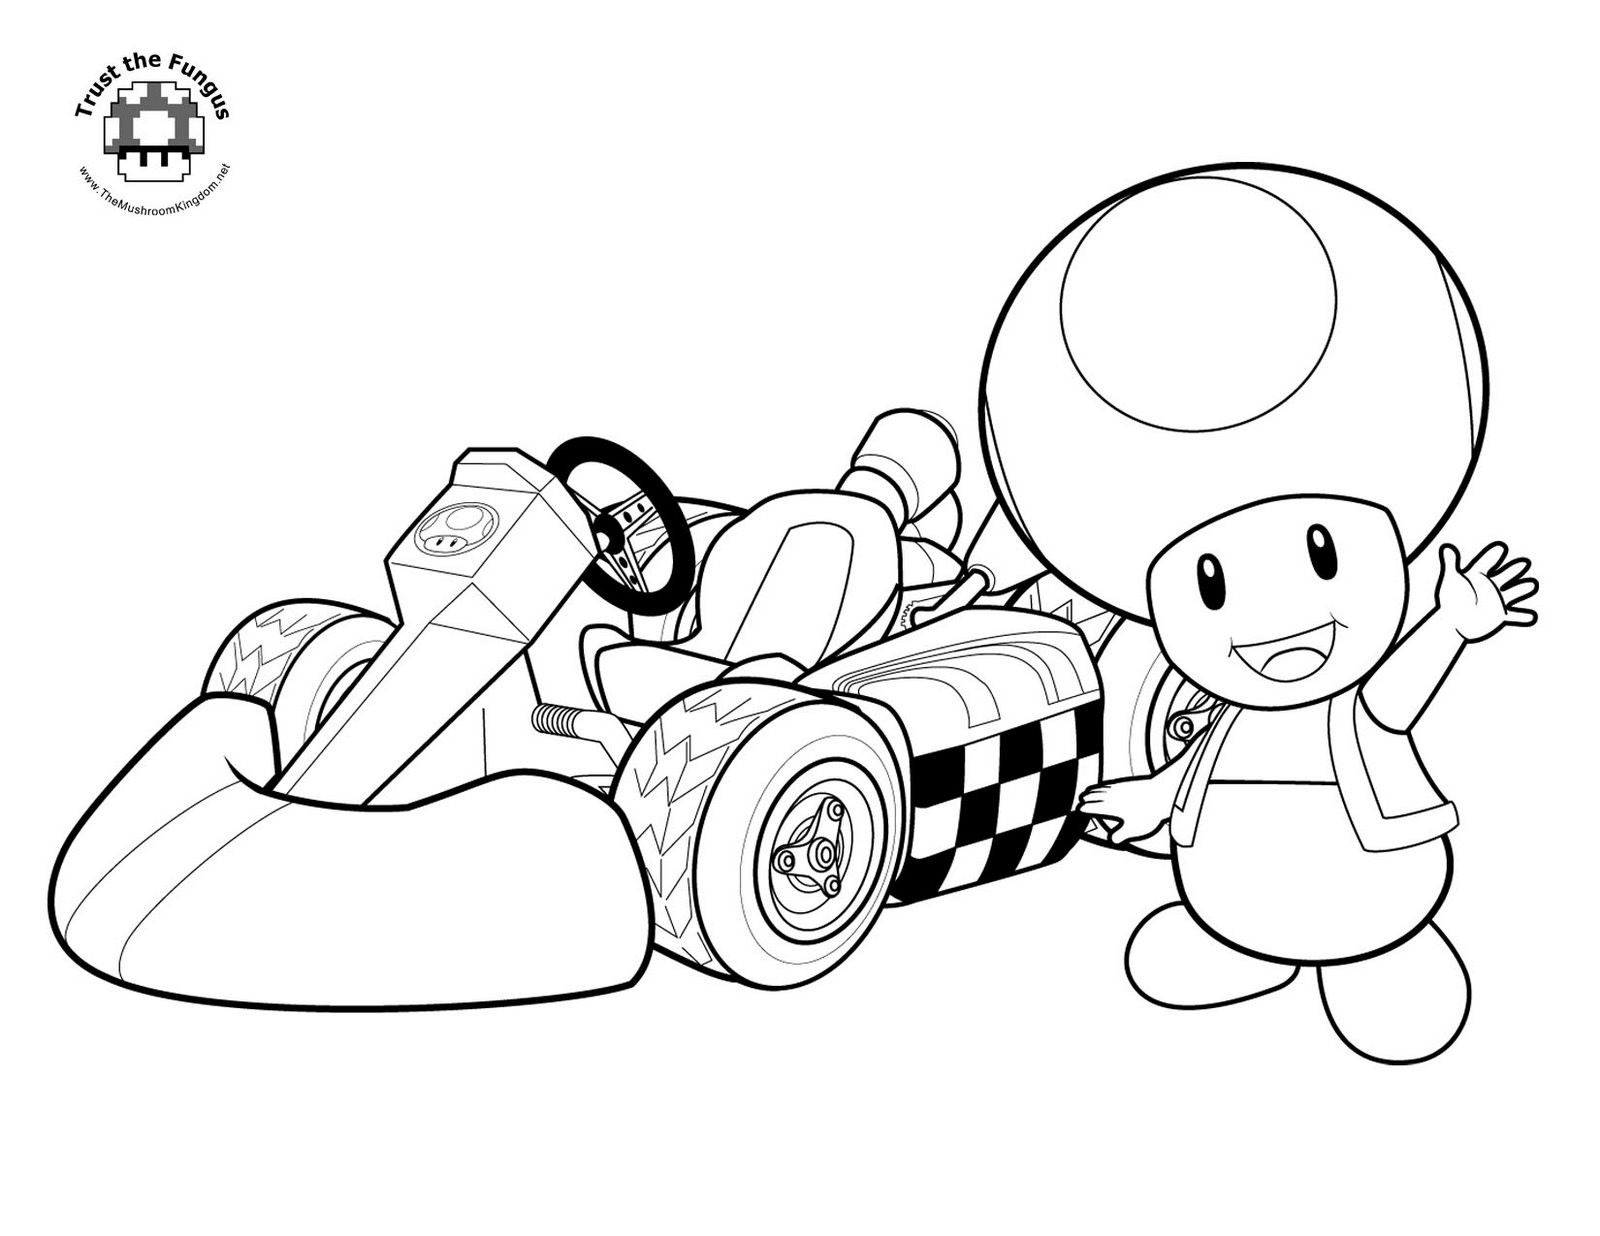 mario-bros-characters-coloring-pages-at-getcolorings-free